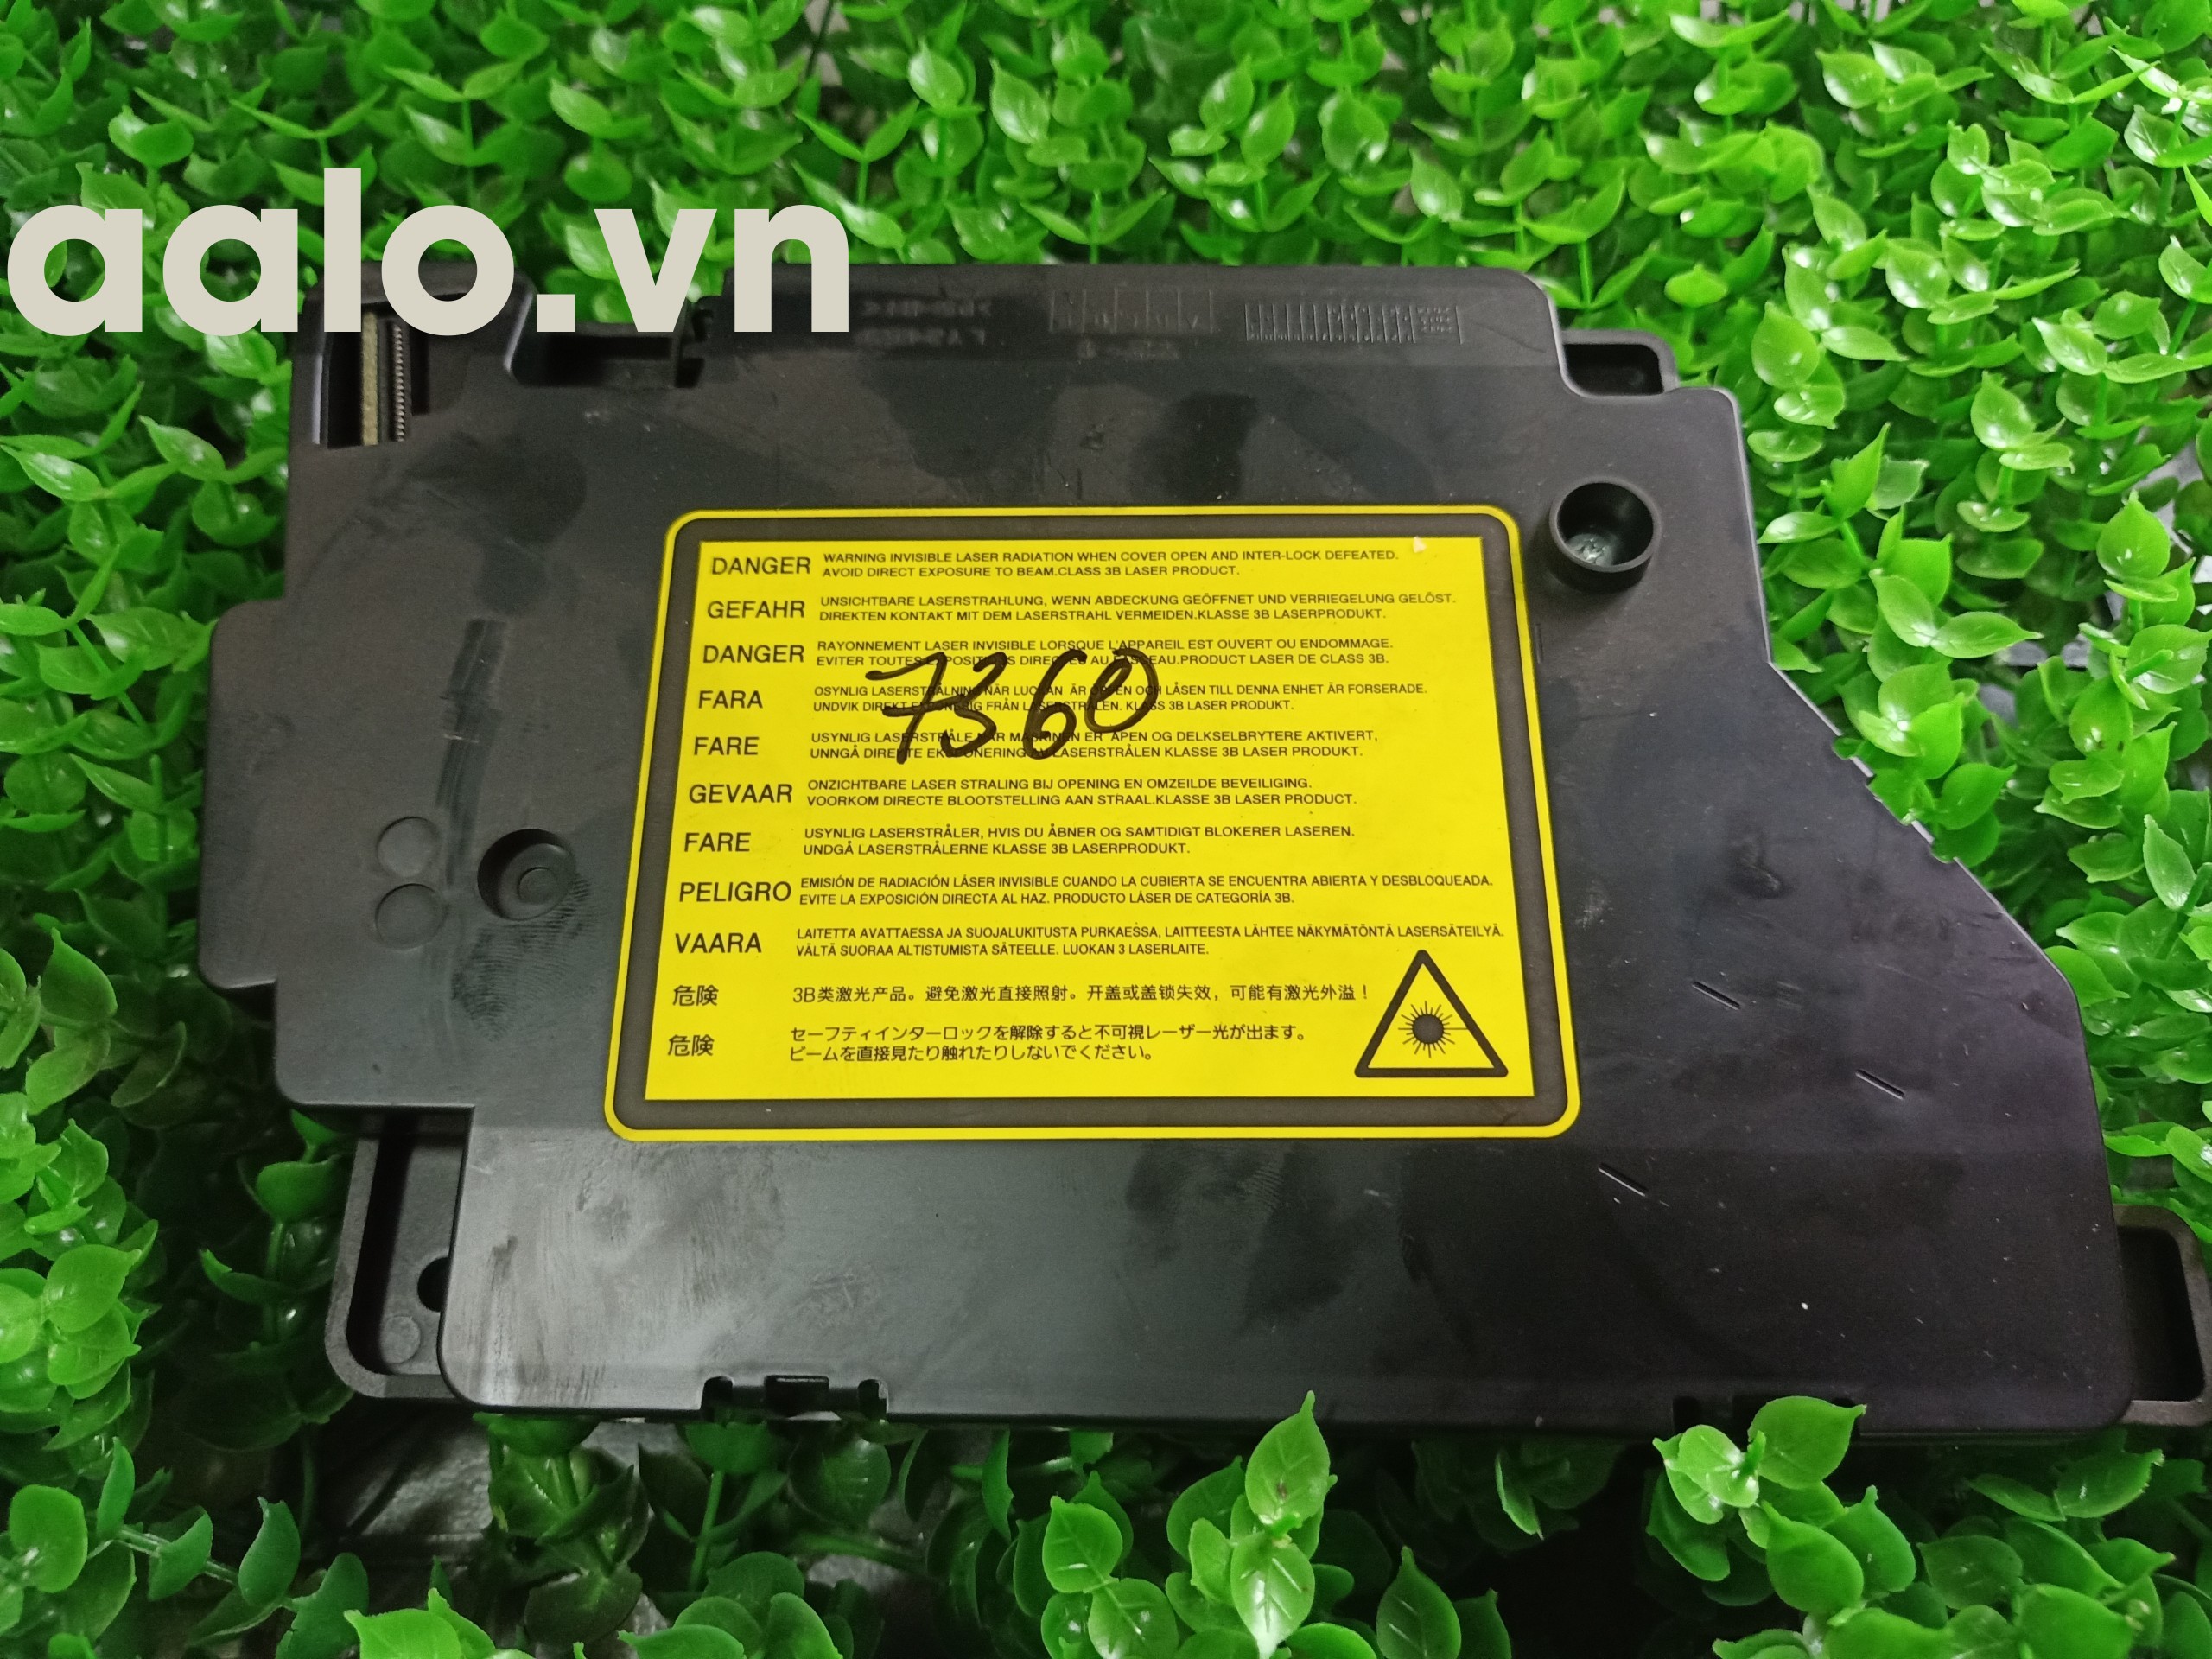 Hộp Quang Máy in Laser đen trắng Đa chức năng Brother MFC-7360 (in, scan, copy, fax) - aalo.vn